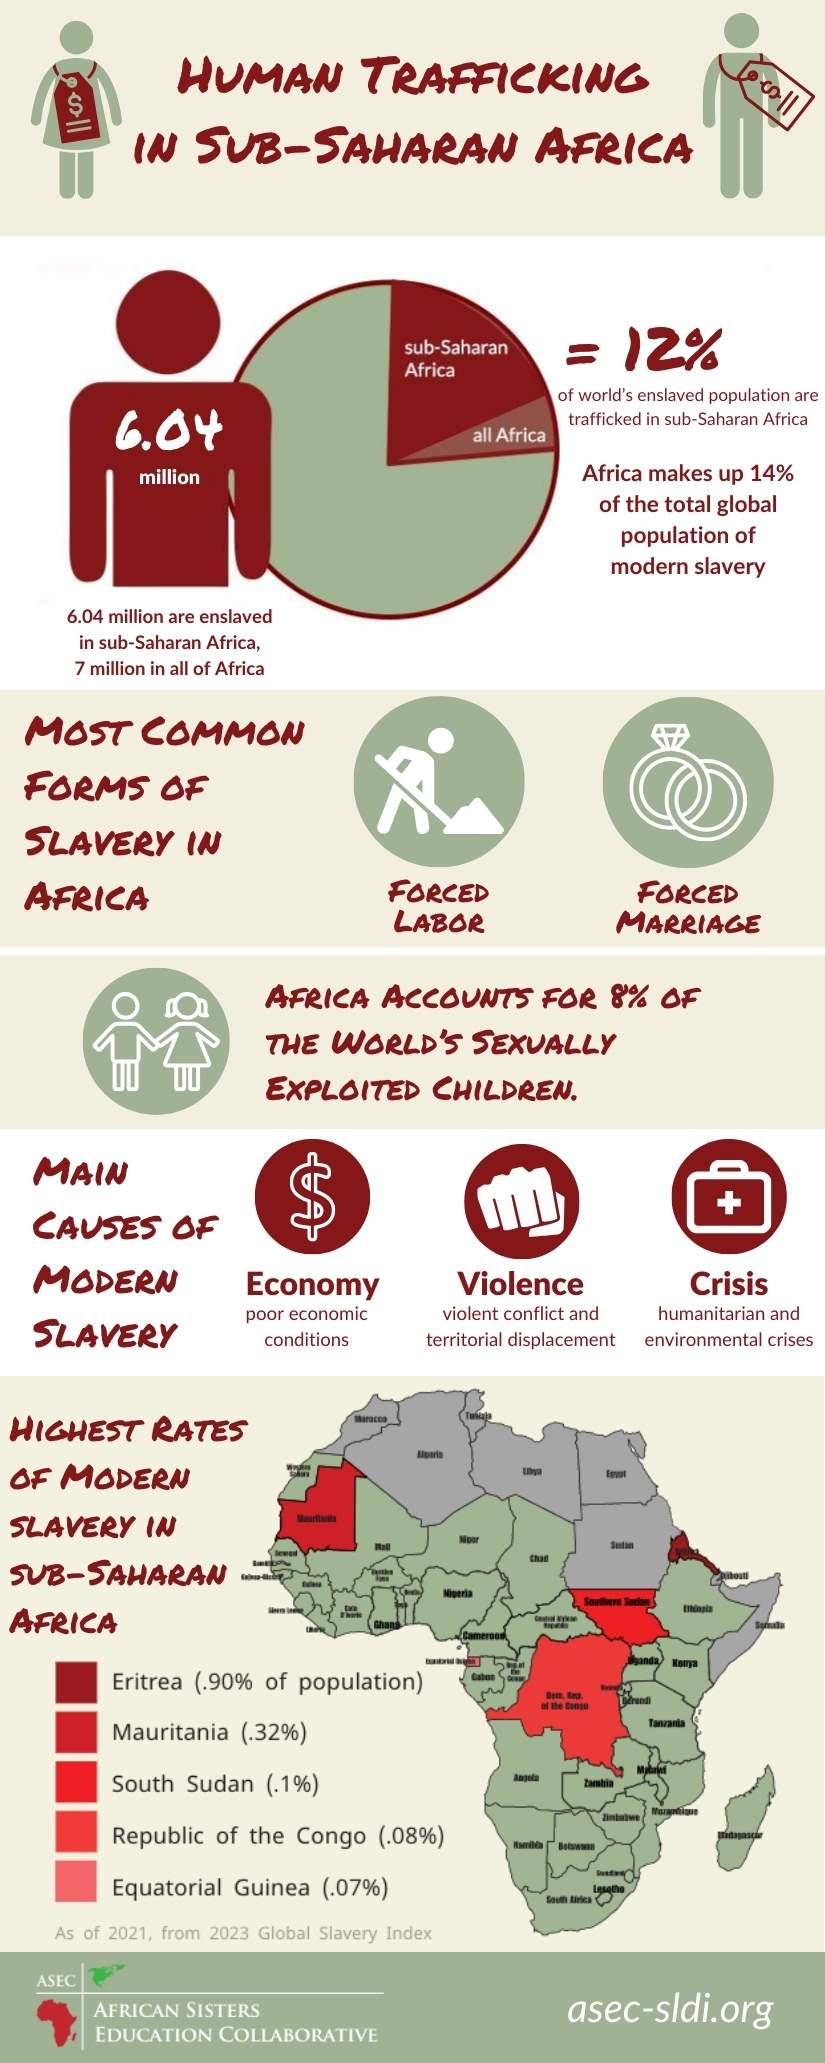 Modern Slavery Statistics in sub-Saharan Africa Infographic. Statistics as of 2021, from the 2023 Global Slavery Index.